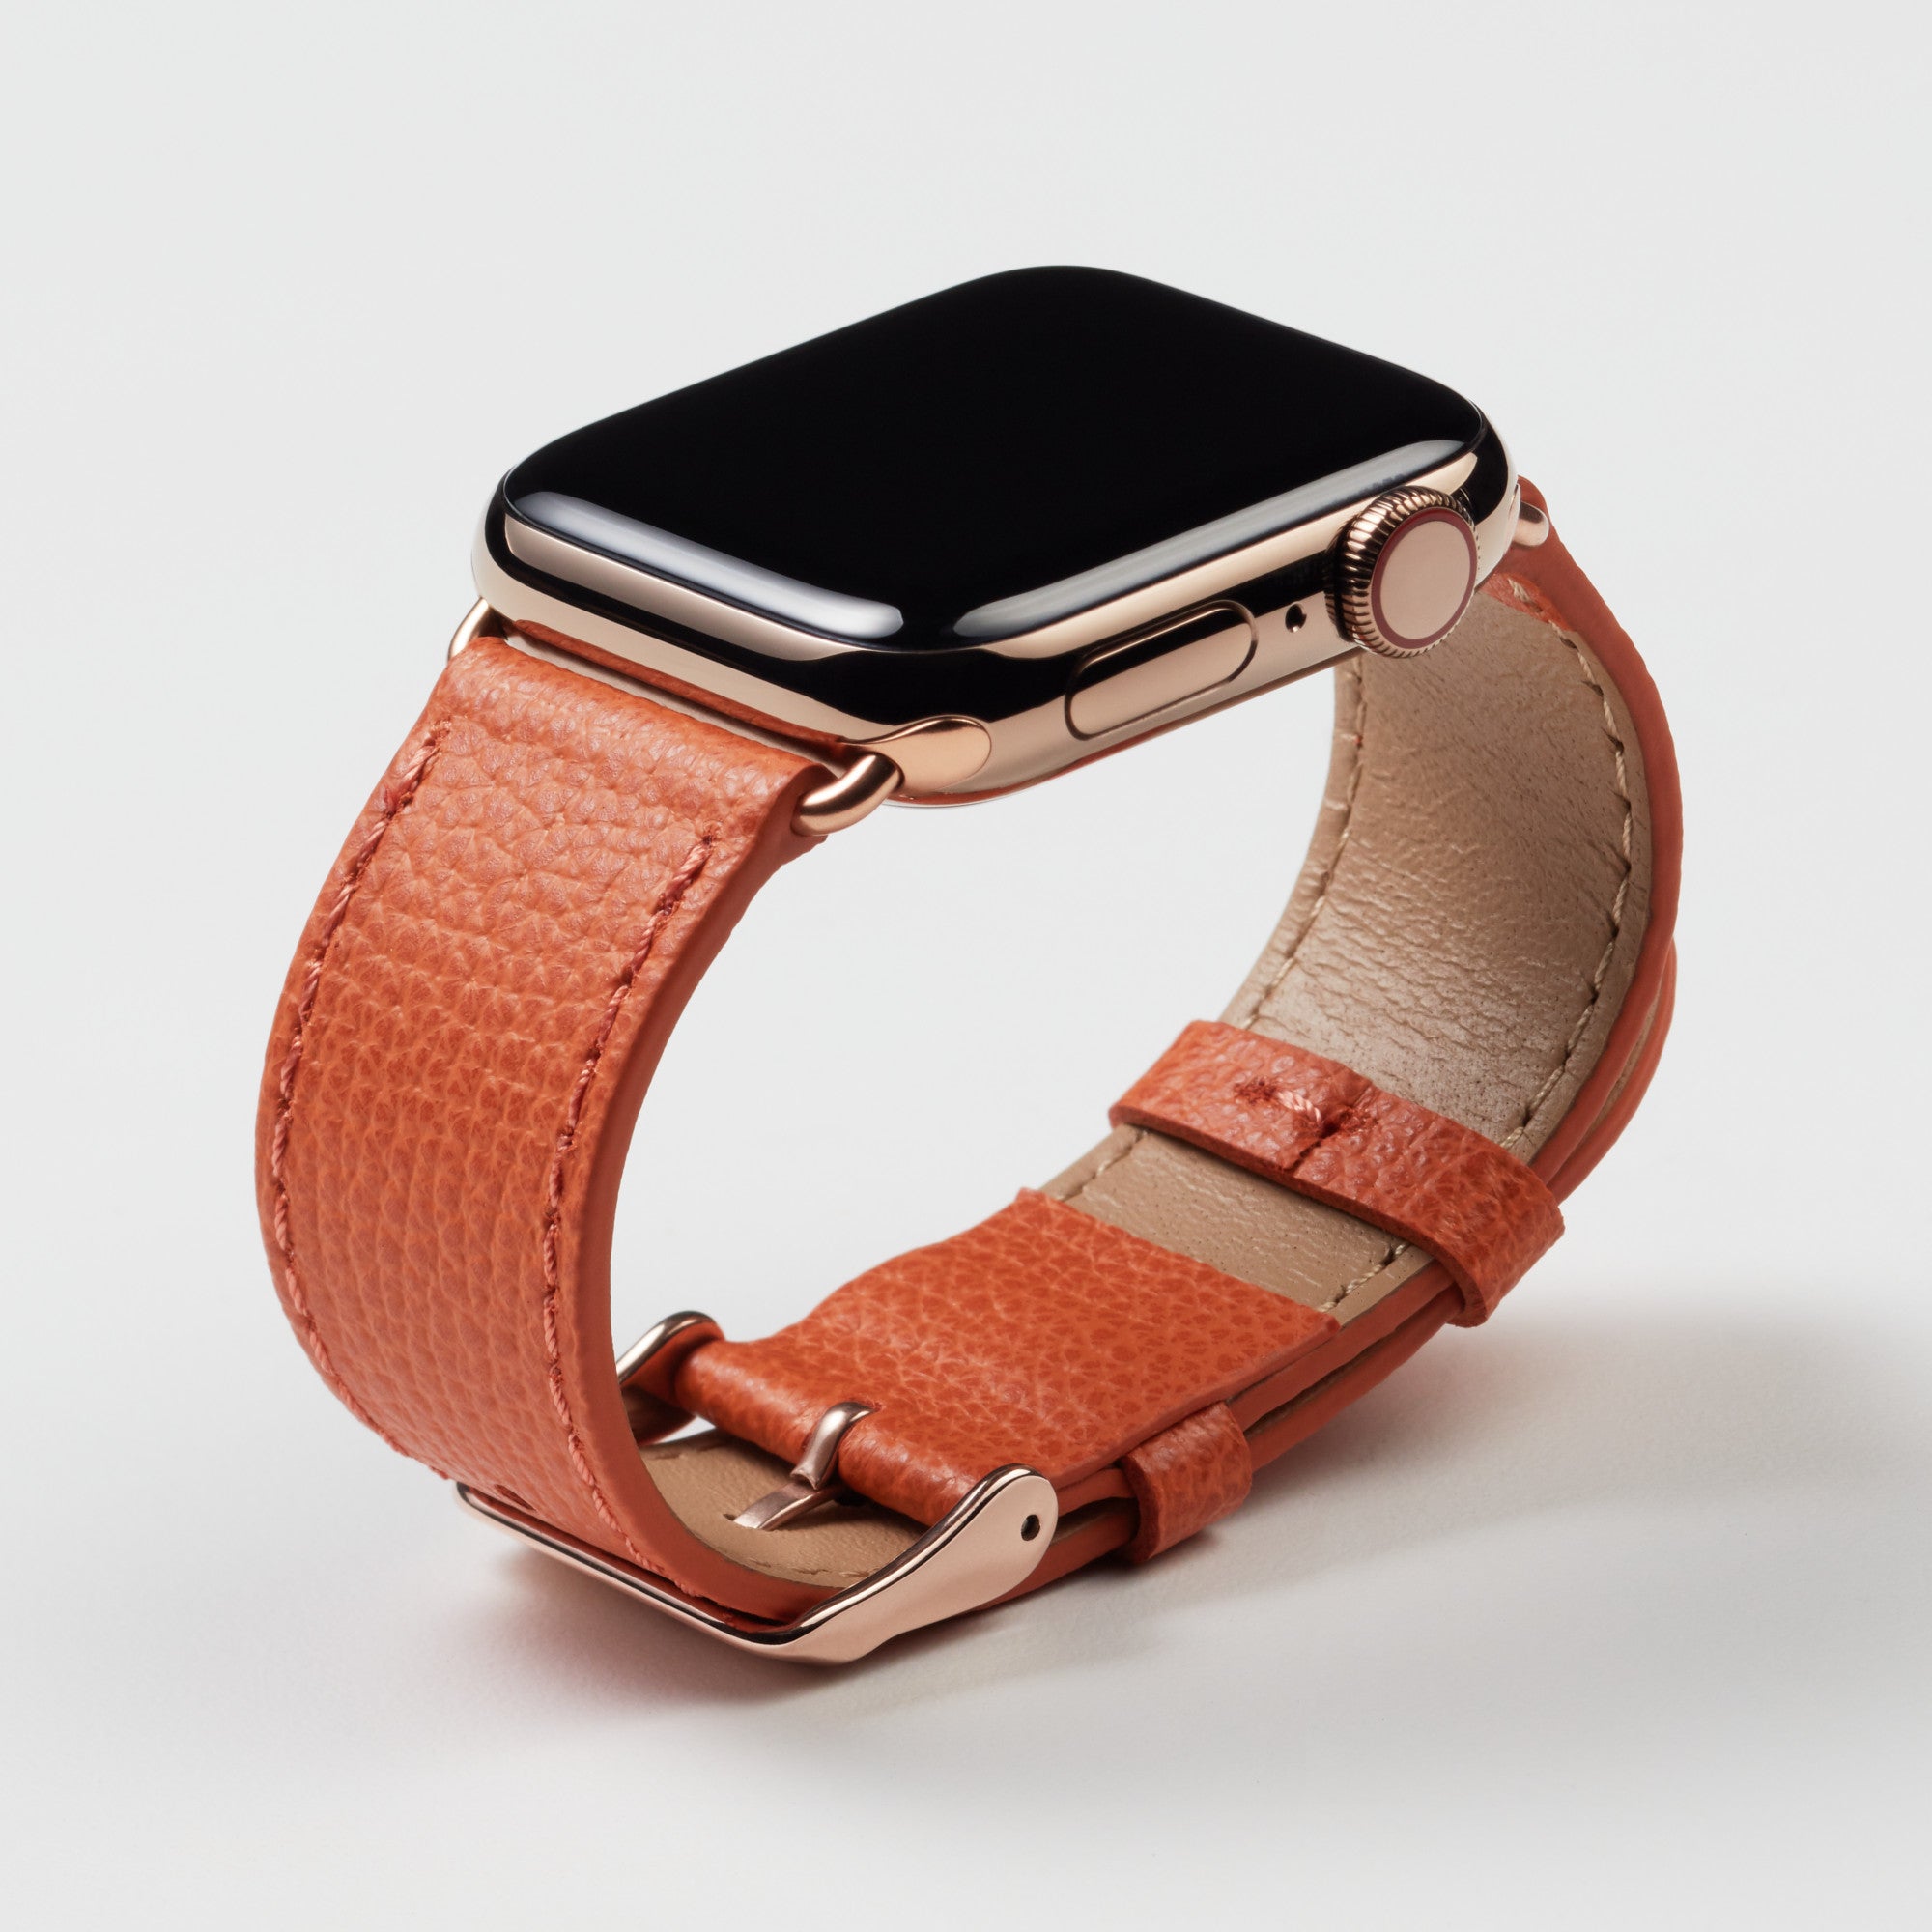 Pin and Buckle Apple Watch Bands - Epsom - Leather Apple Watch Band - Royal Orange - Gold